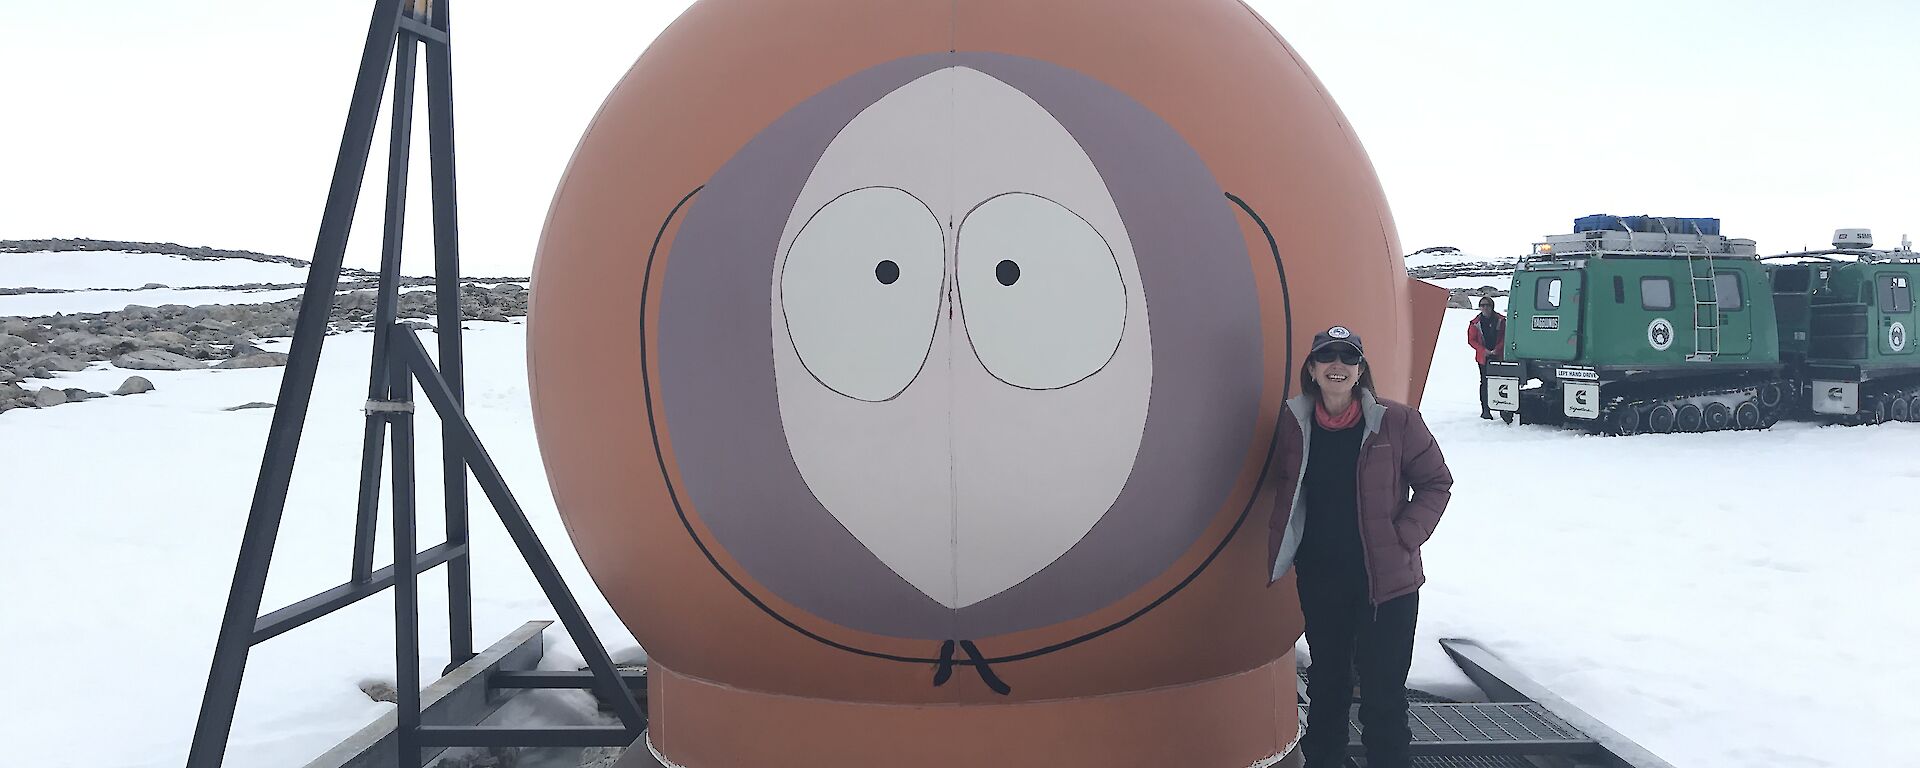 A warmly clad person standing next to a round red hut that has a face on it (Kenny from Southpark).